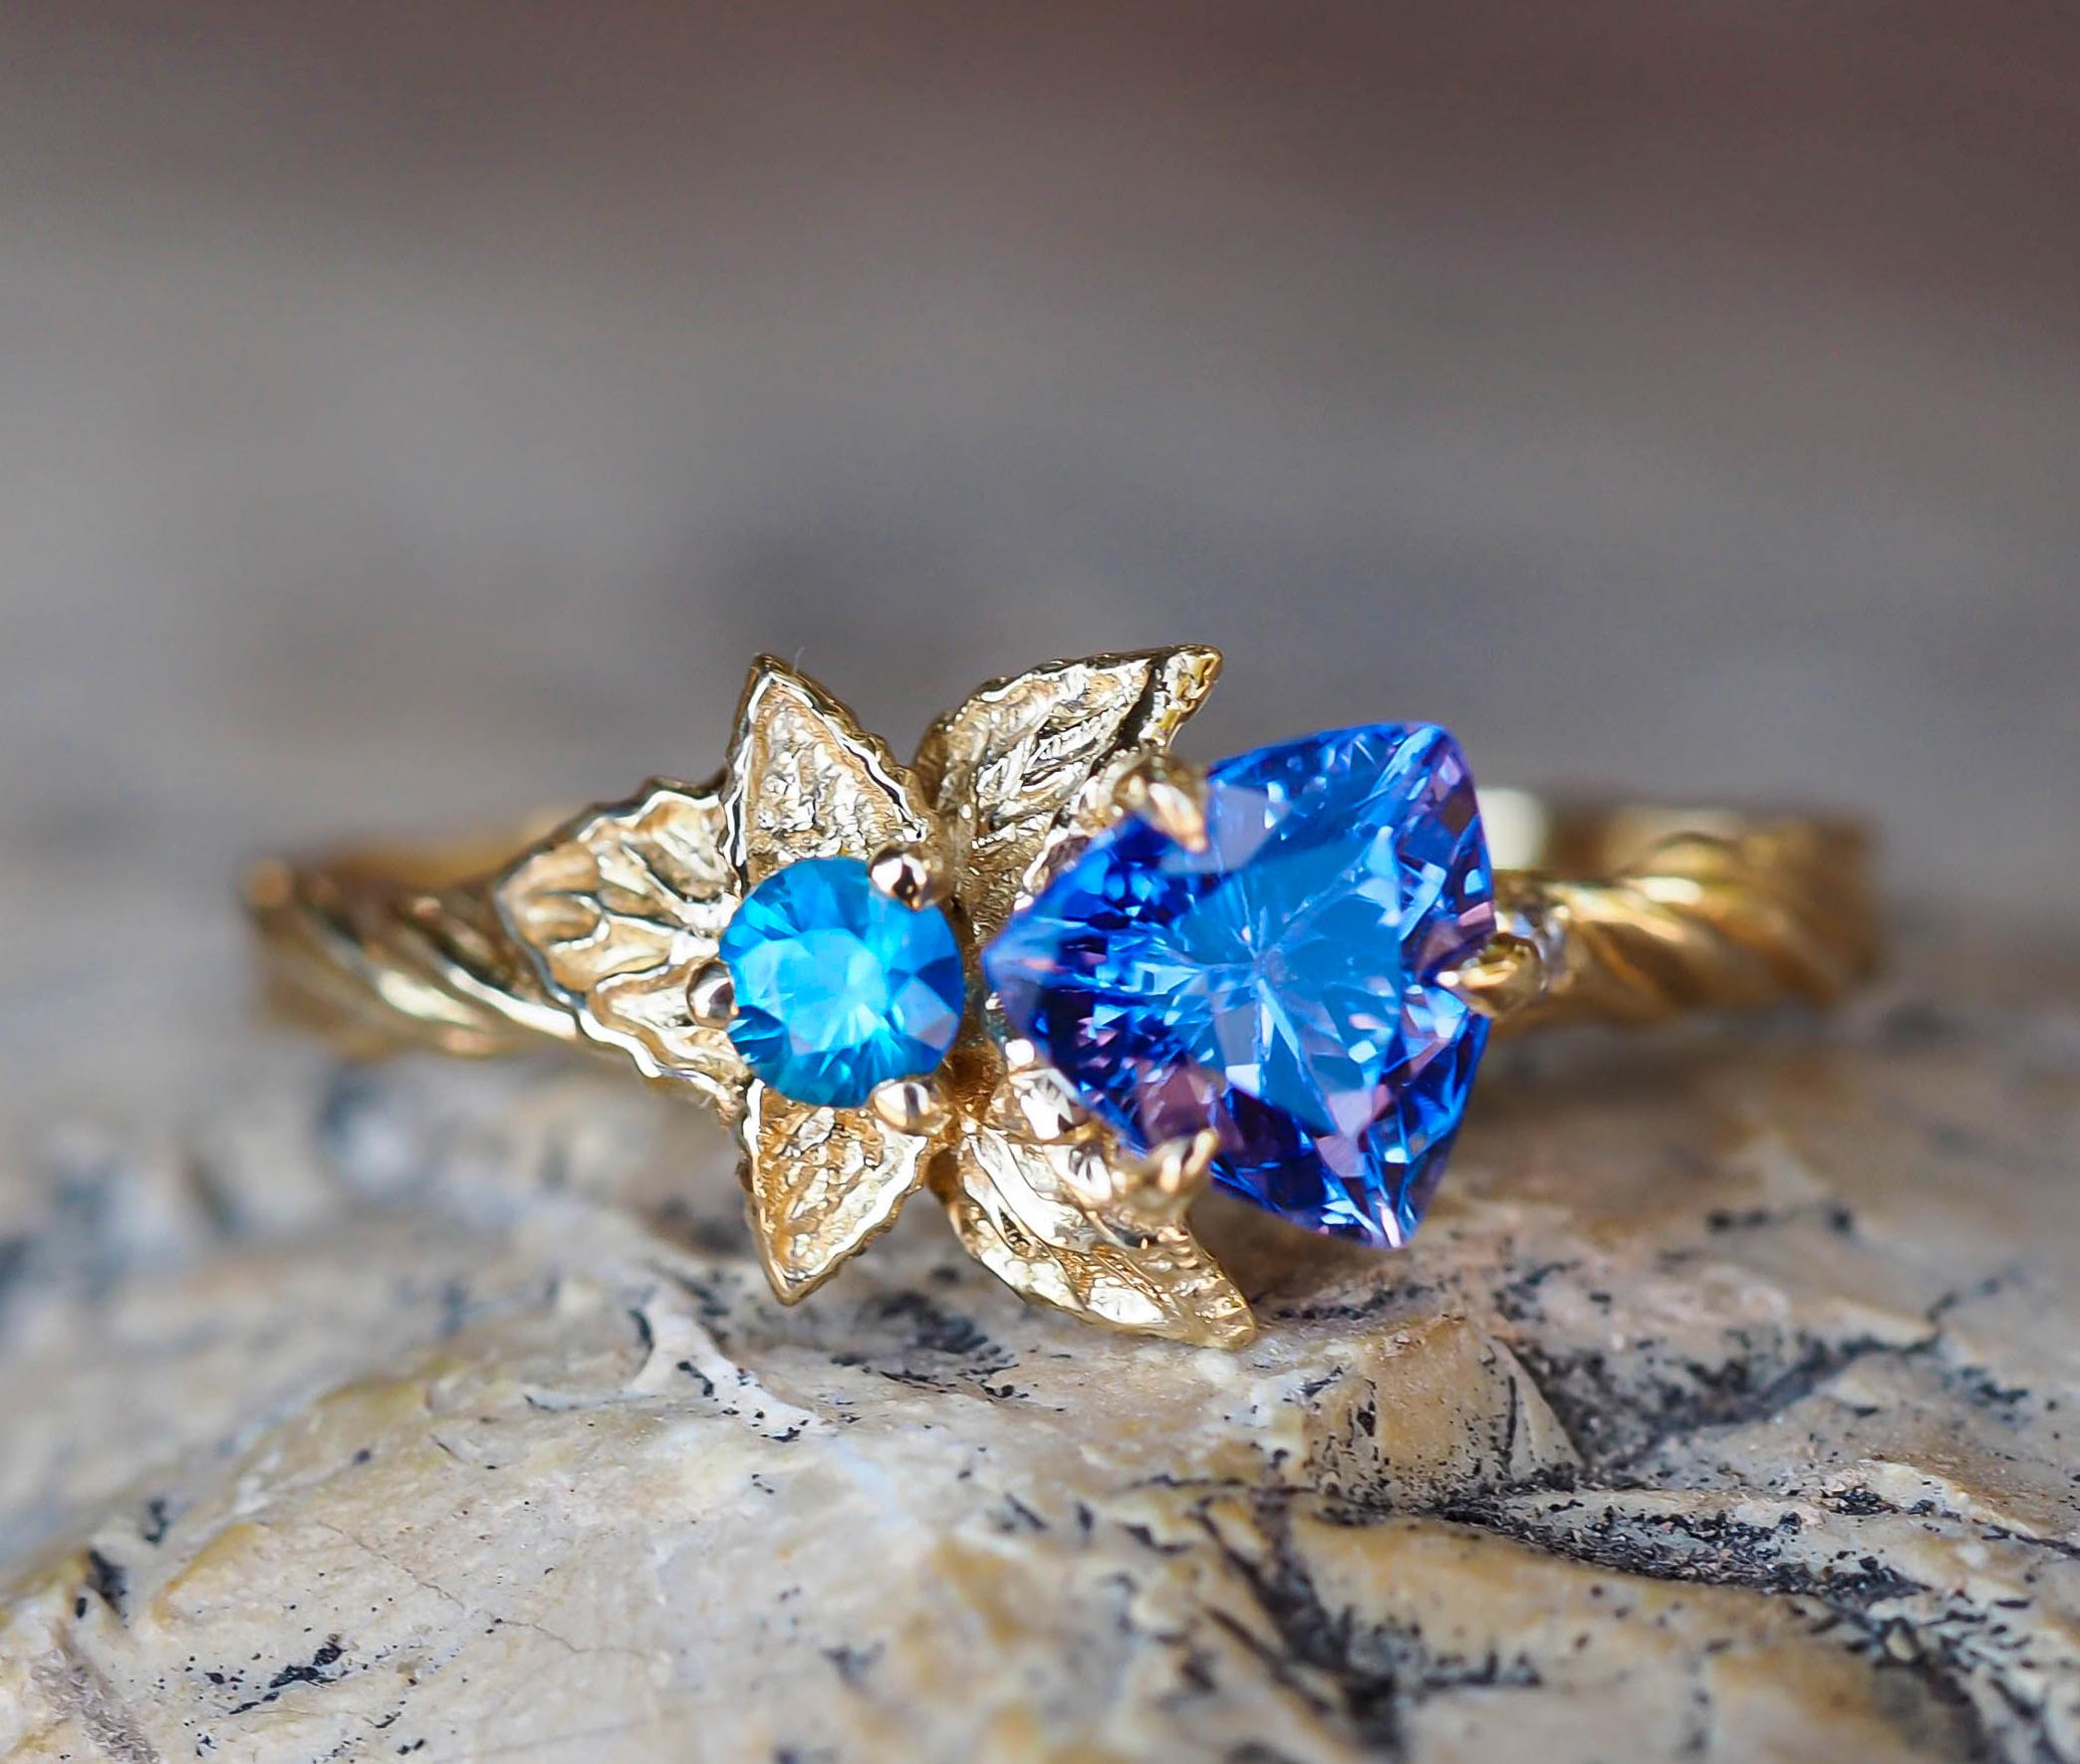 For Sale:  Tanzanite and diamonds 14k gold ring. Flower design ring with tanzanite. 4